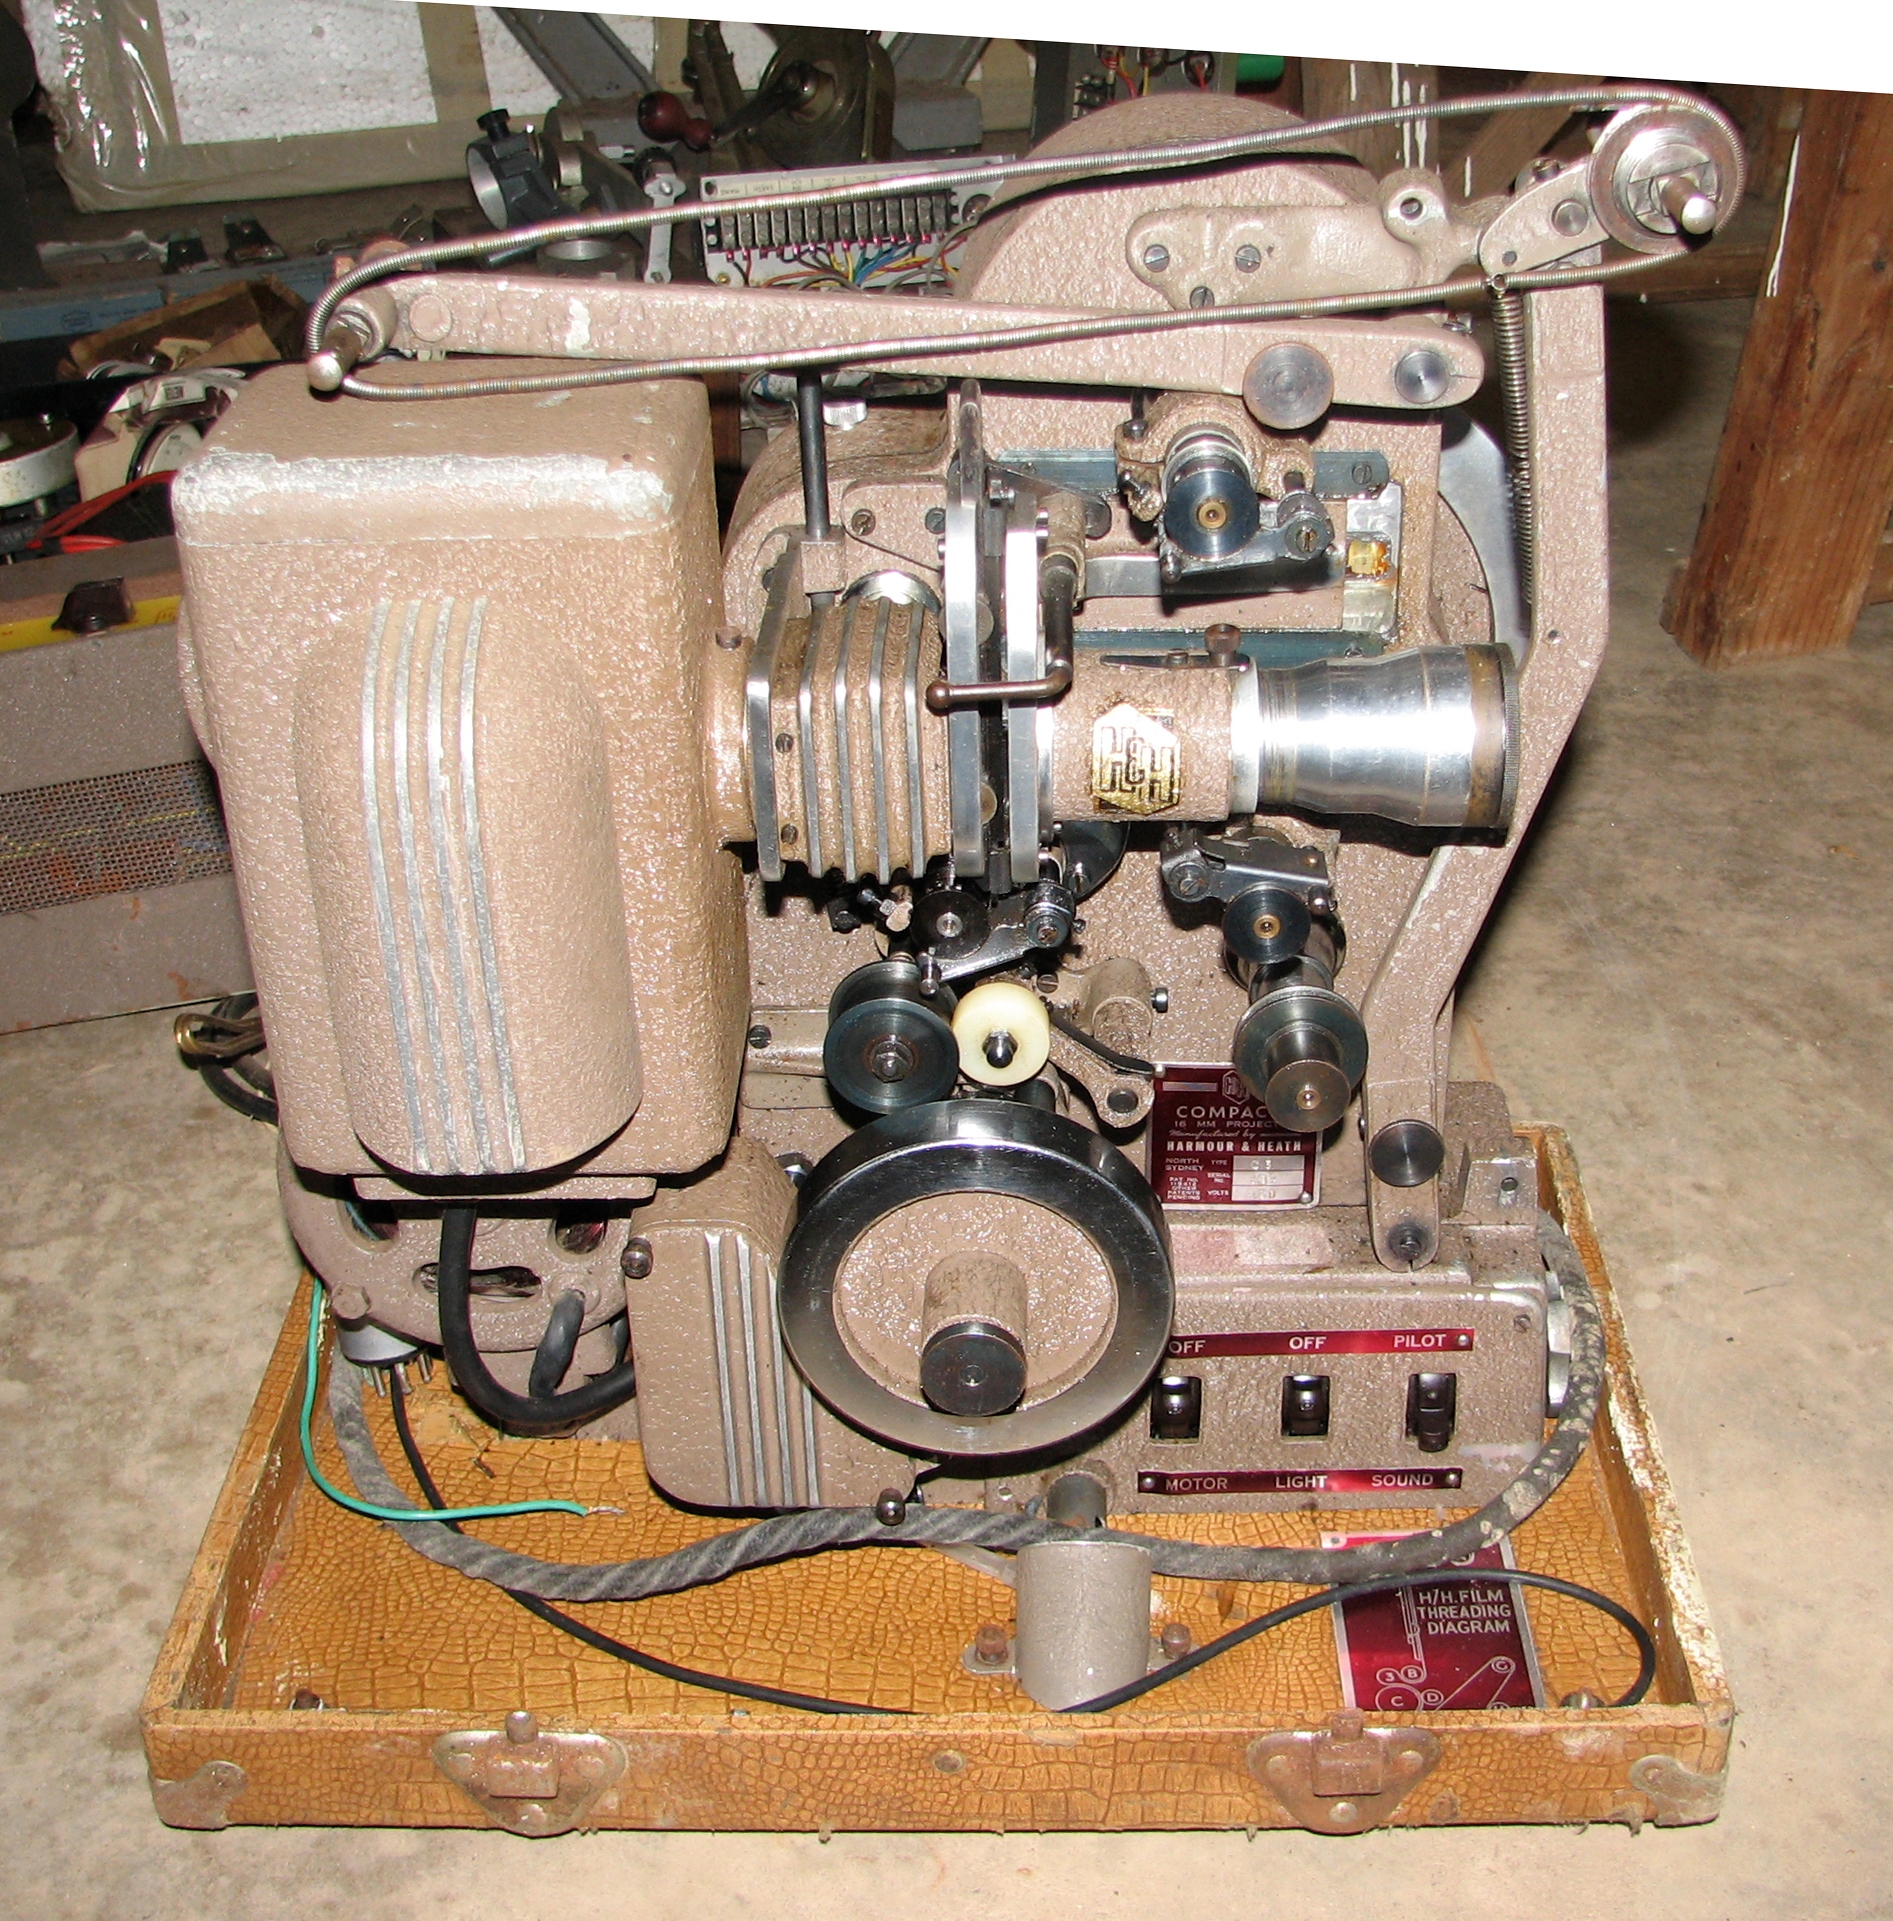 Harmour & Heath motion picture projector